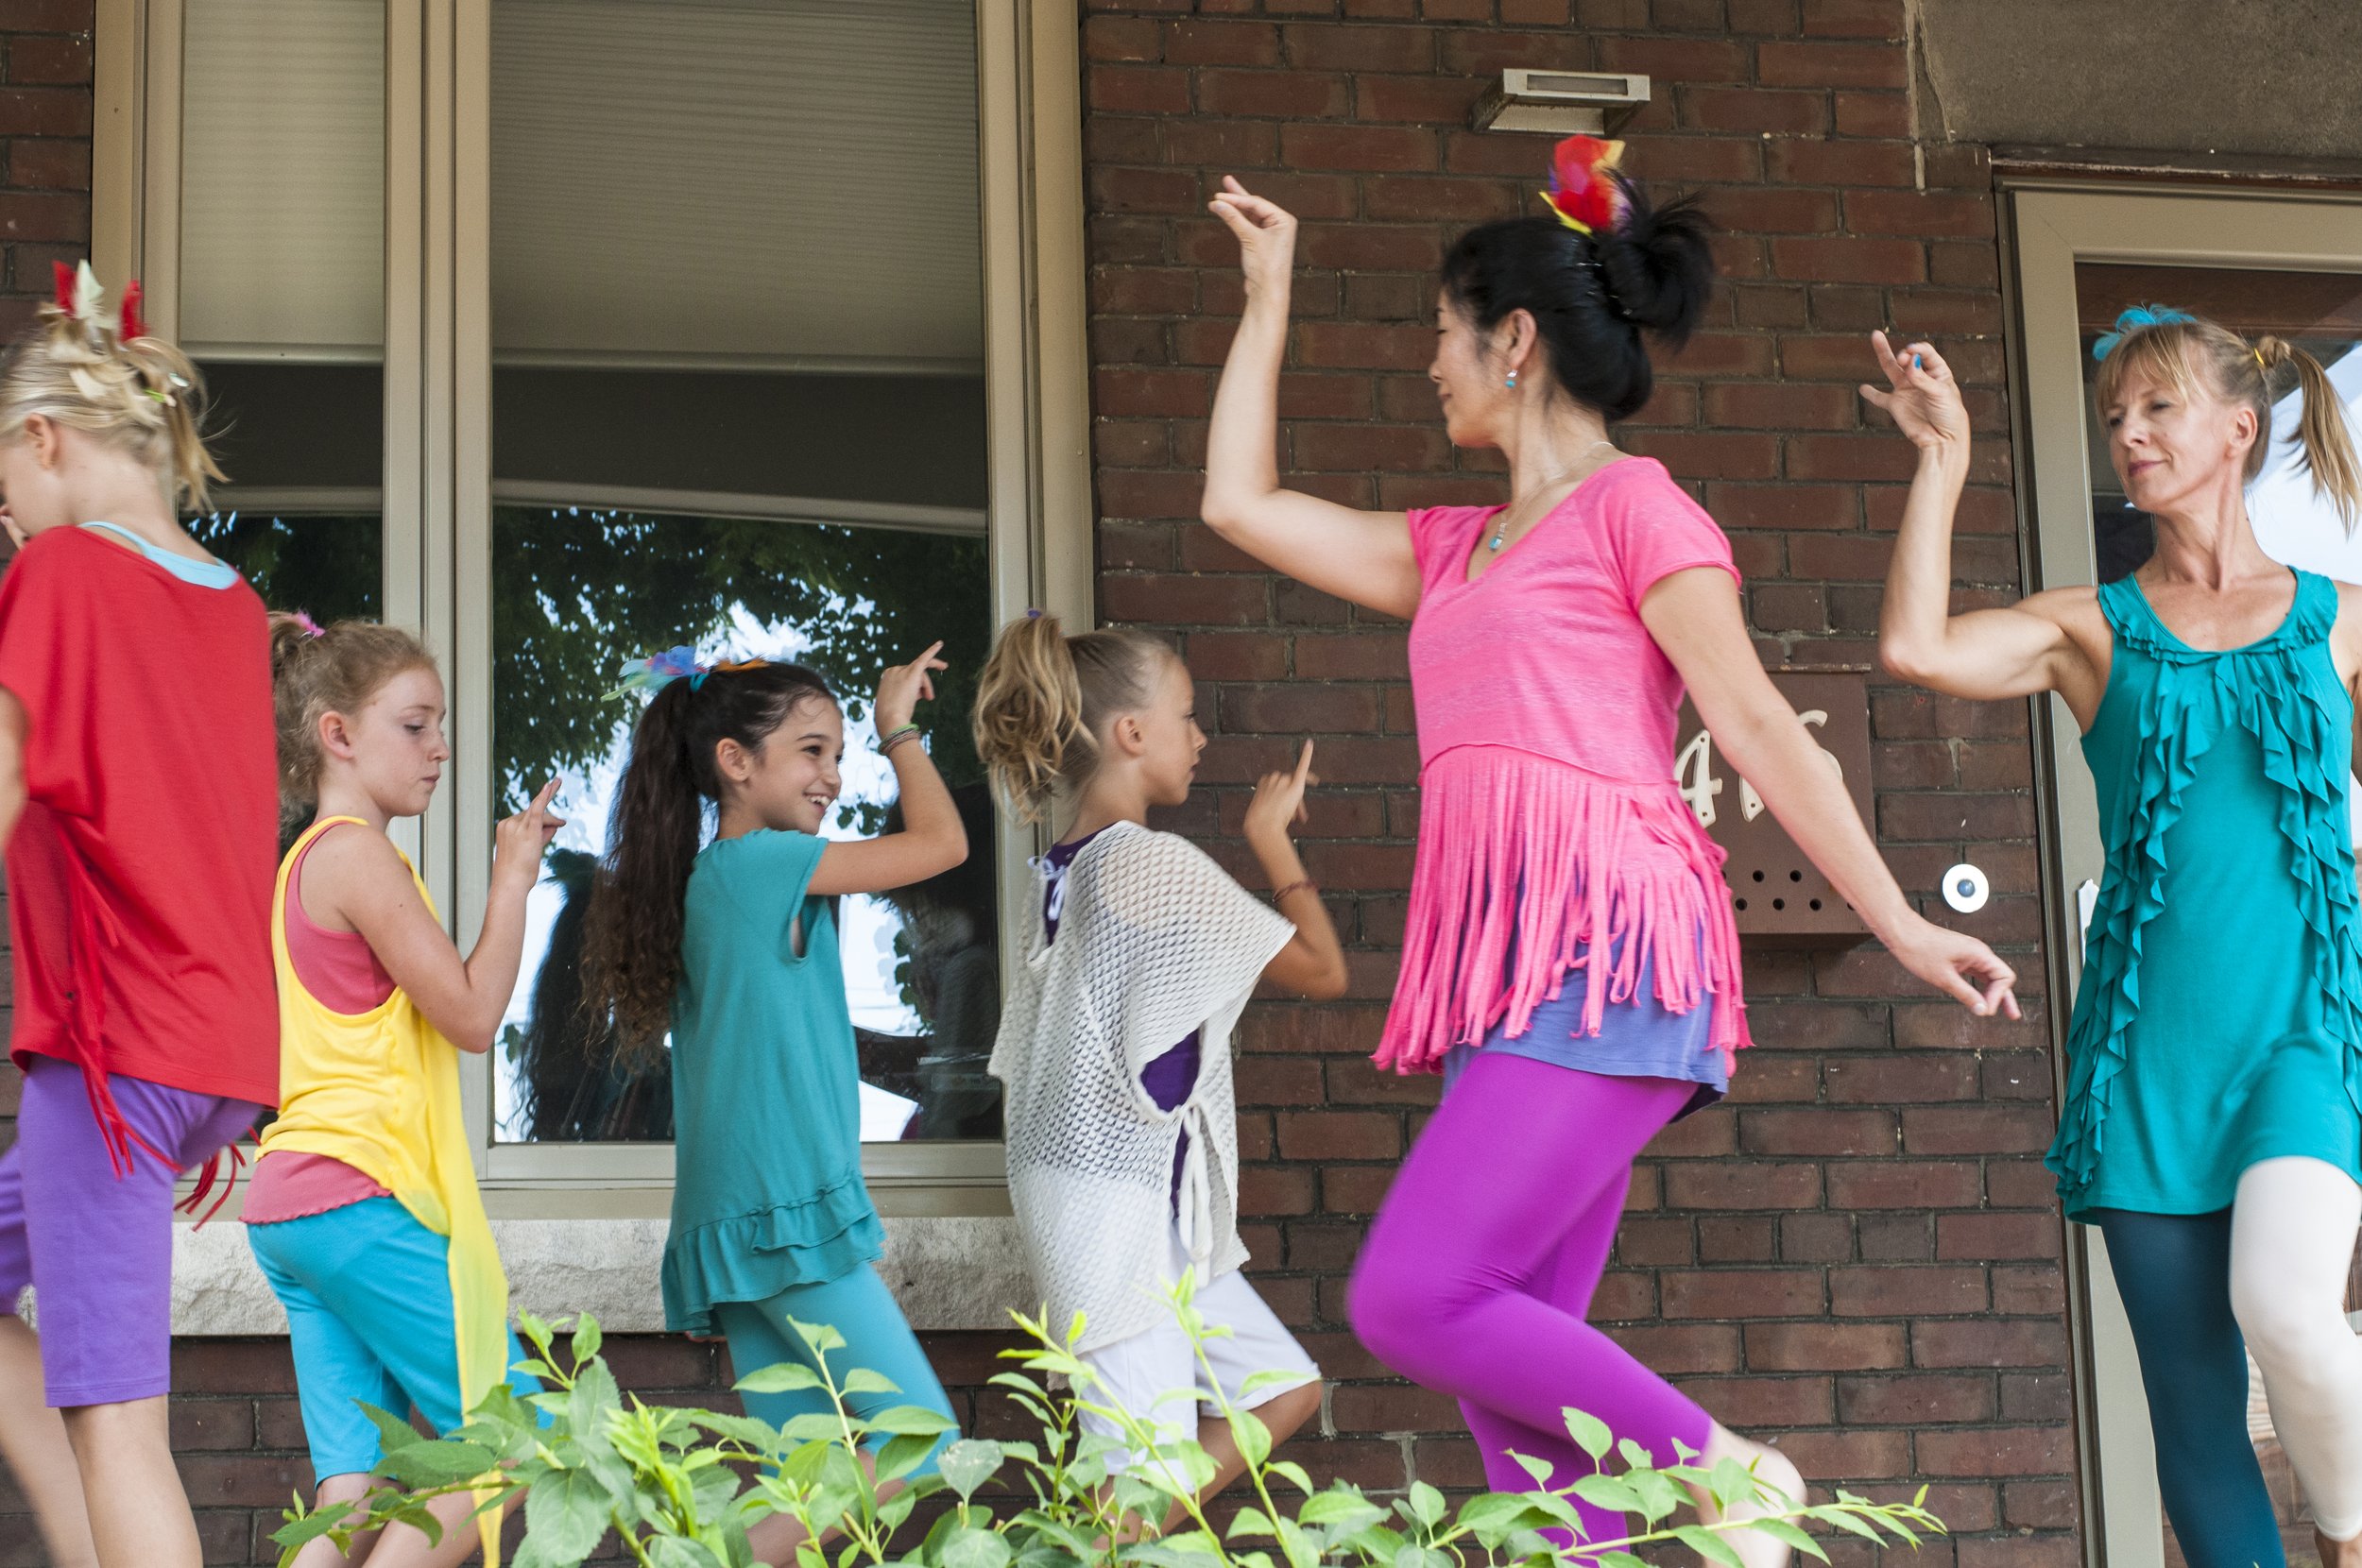 A group of young community participants dancing on a porch.